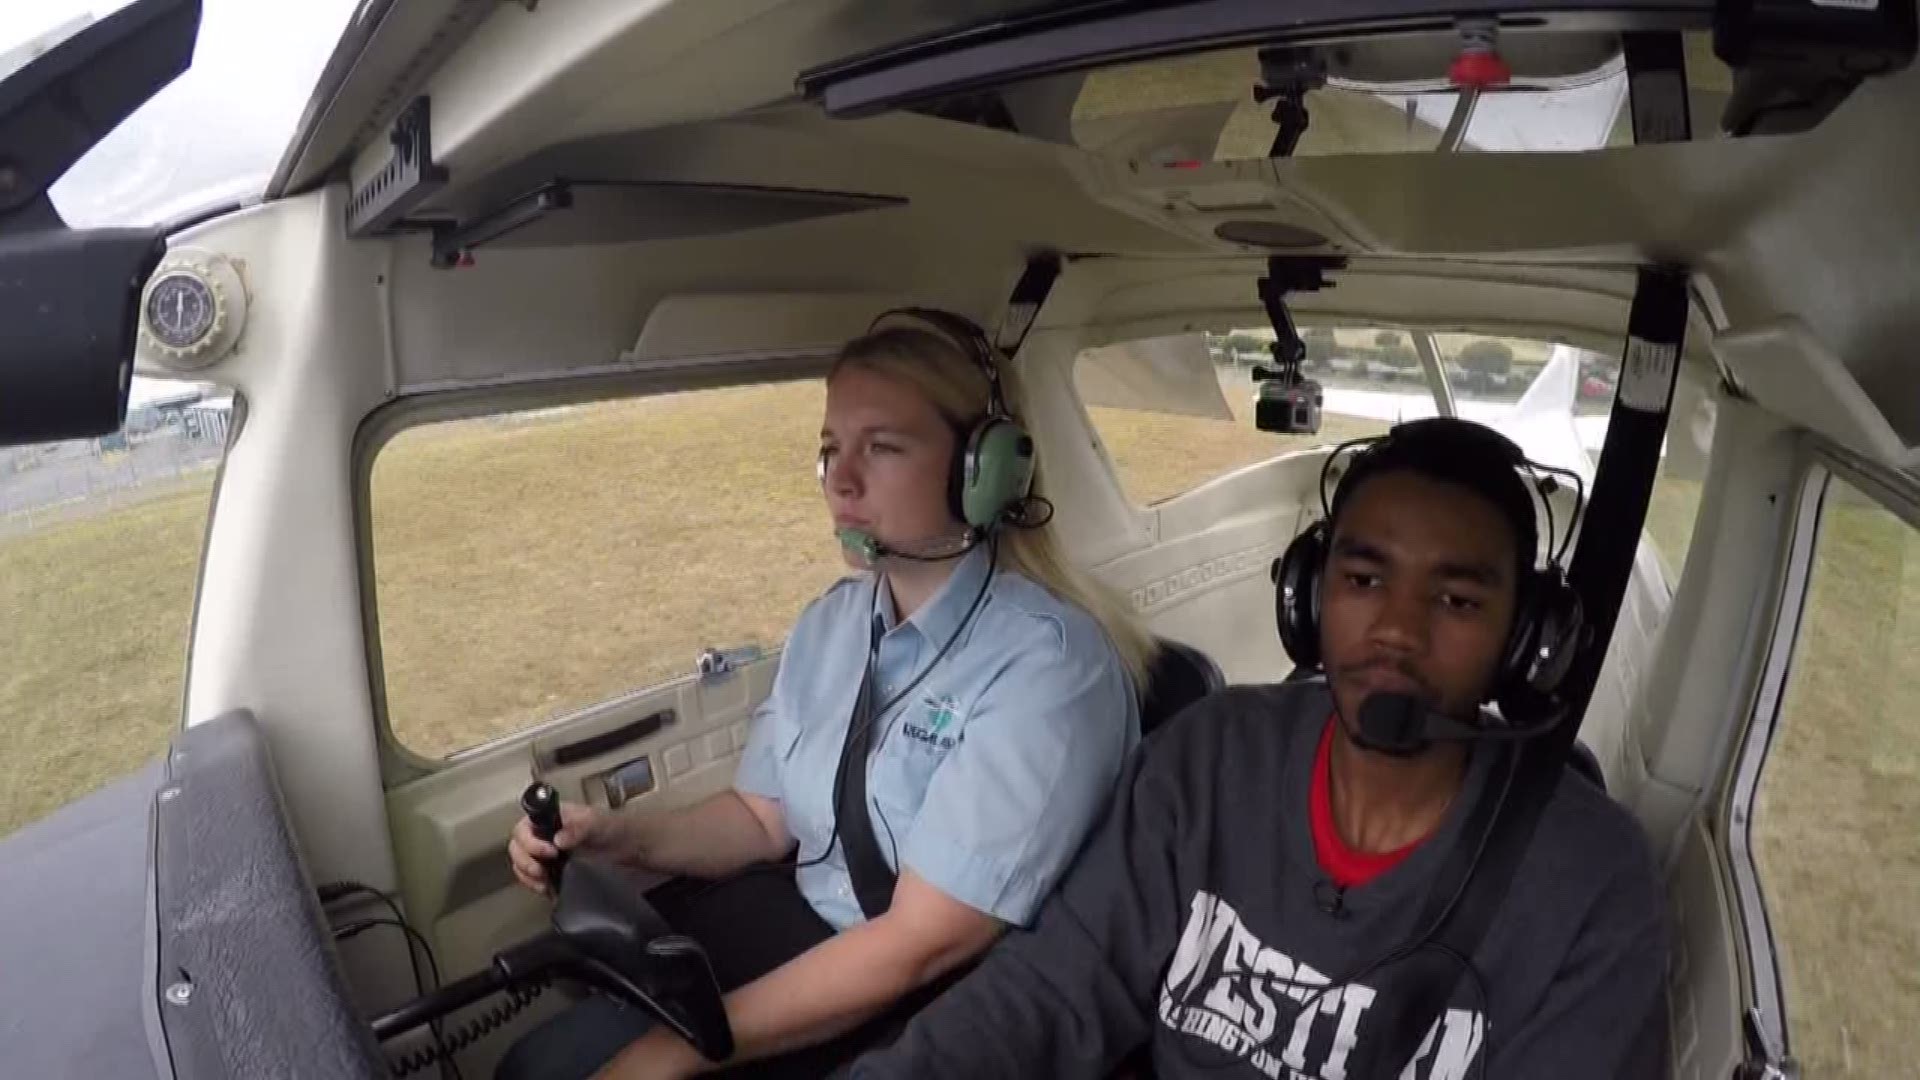 For the first time, NASA teamed up with a local flying club to offer seven teenagers the opportunity of a lifetime.